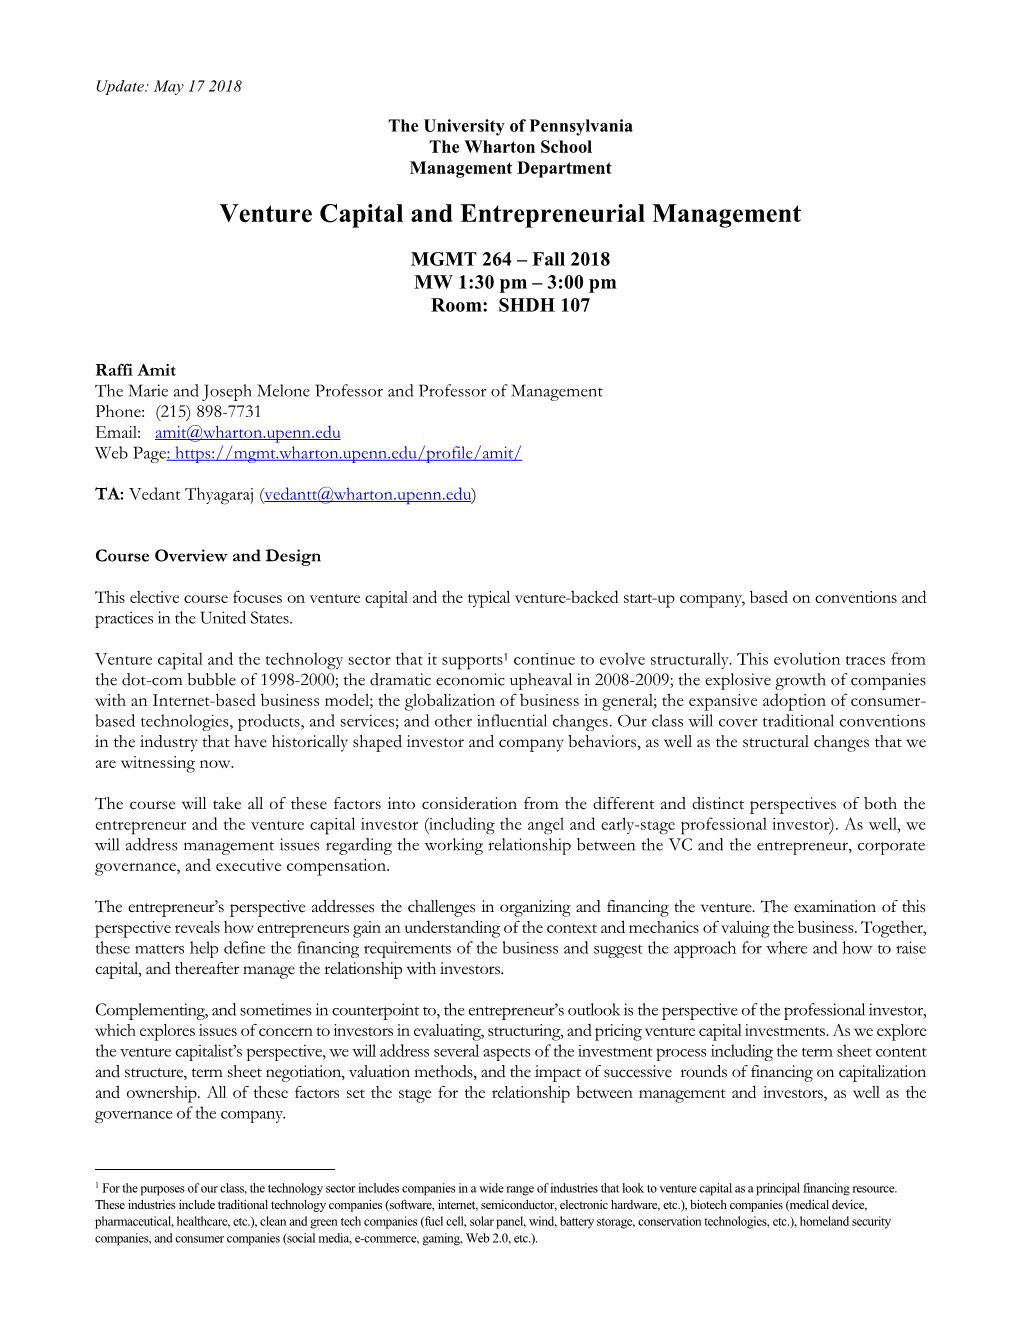 MGMT 264 VC and Entrepreneurial Management